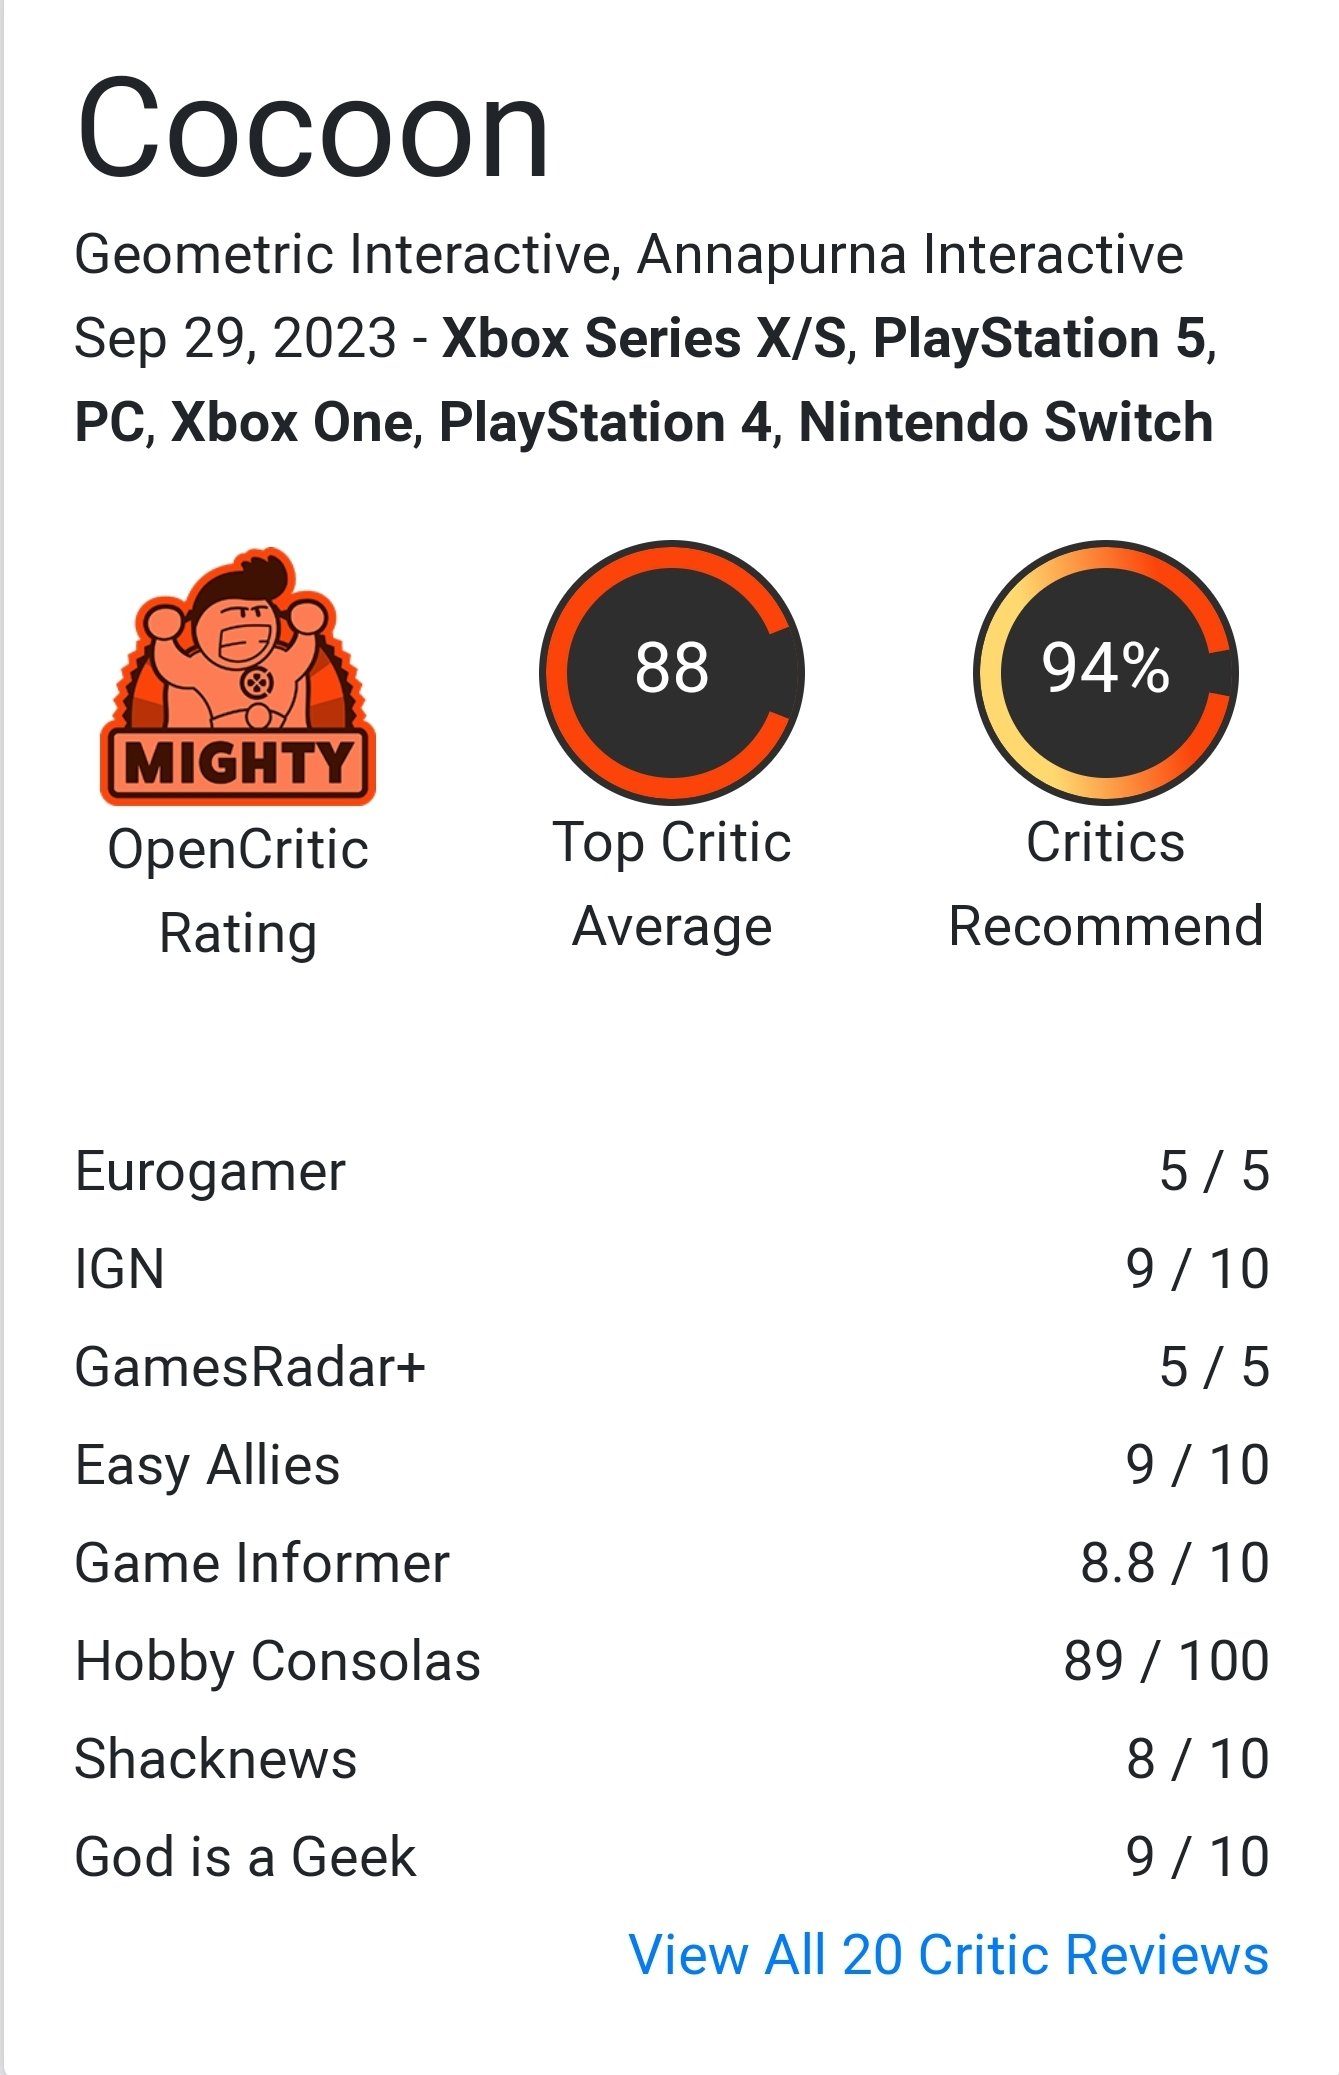 Outer Wilds: Echoes of the Eye - Metacritic